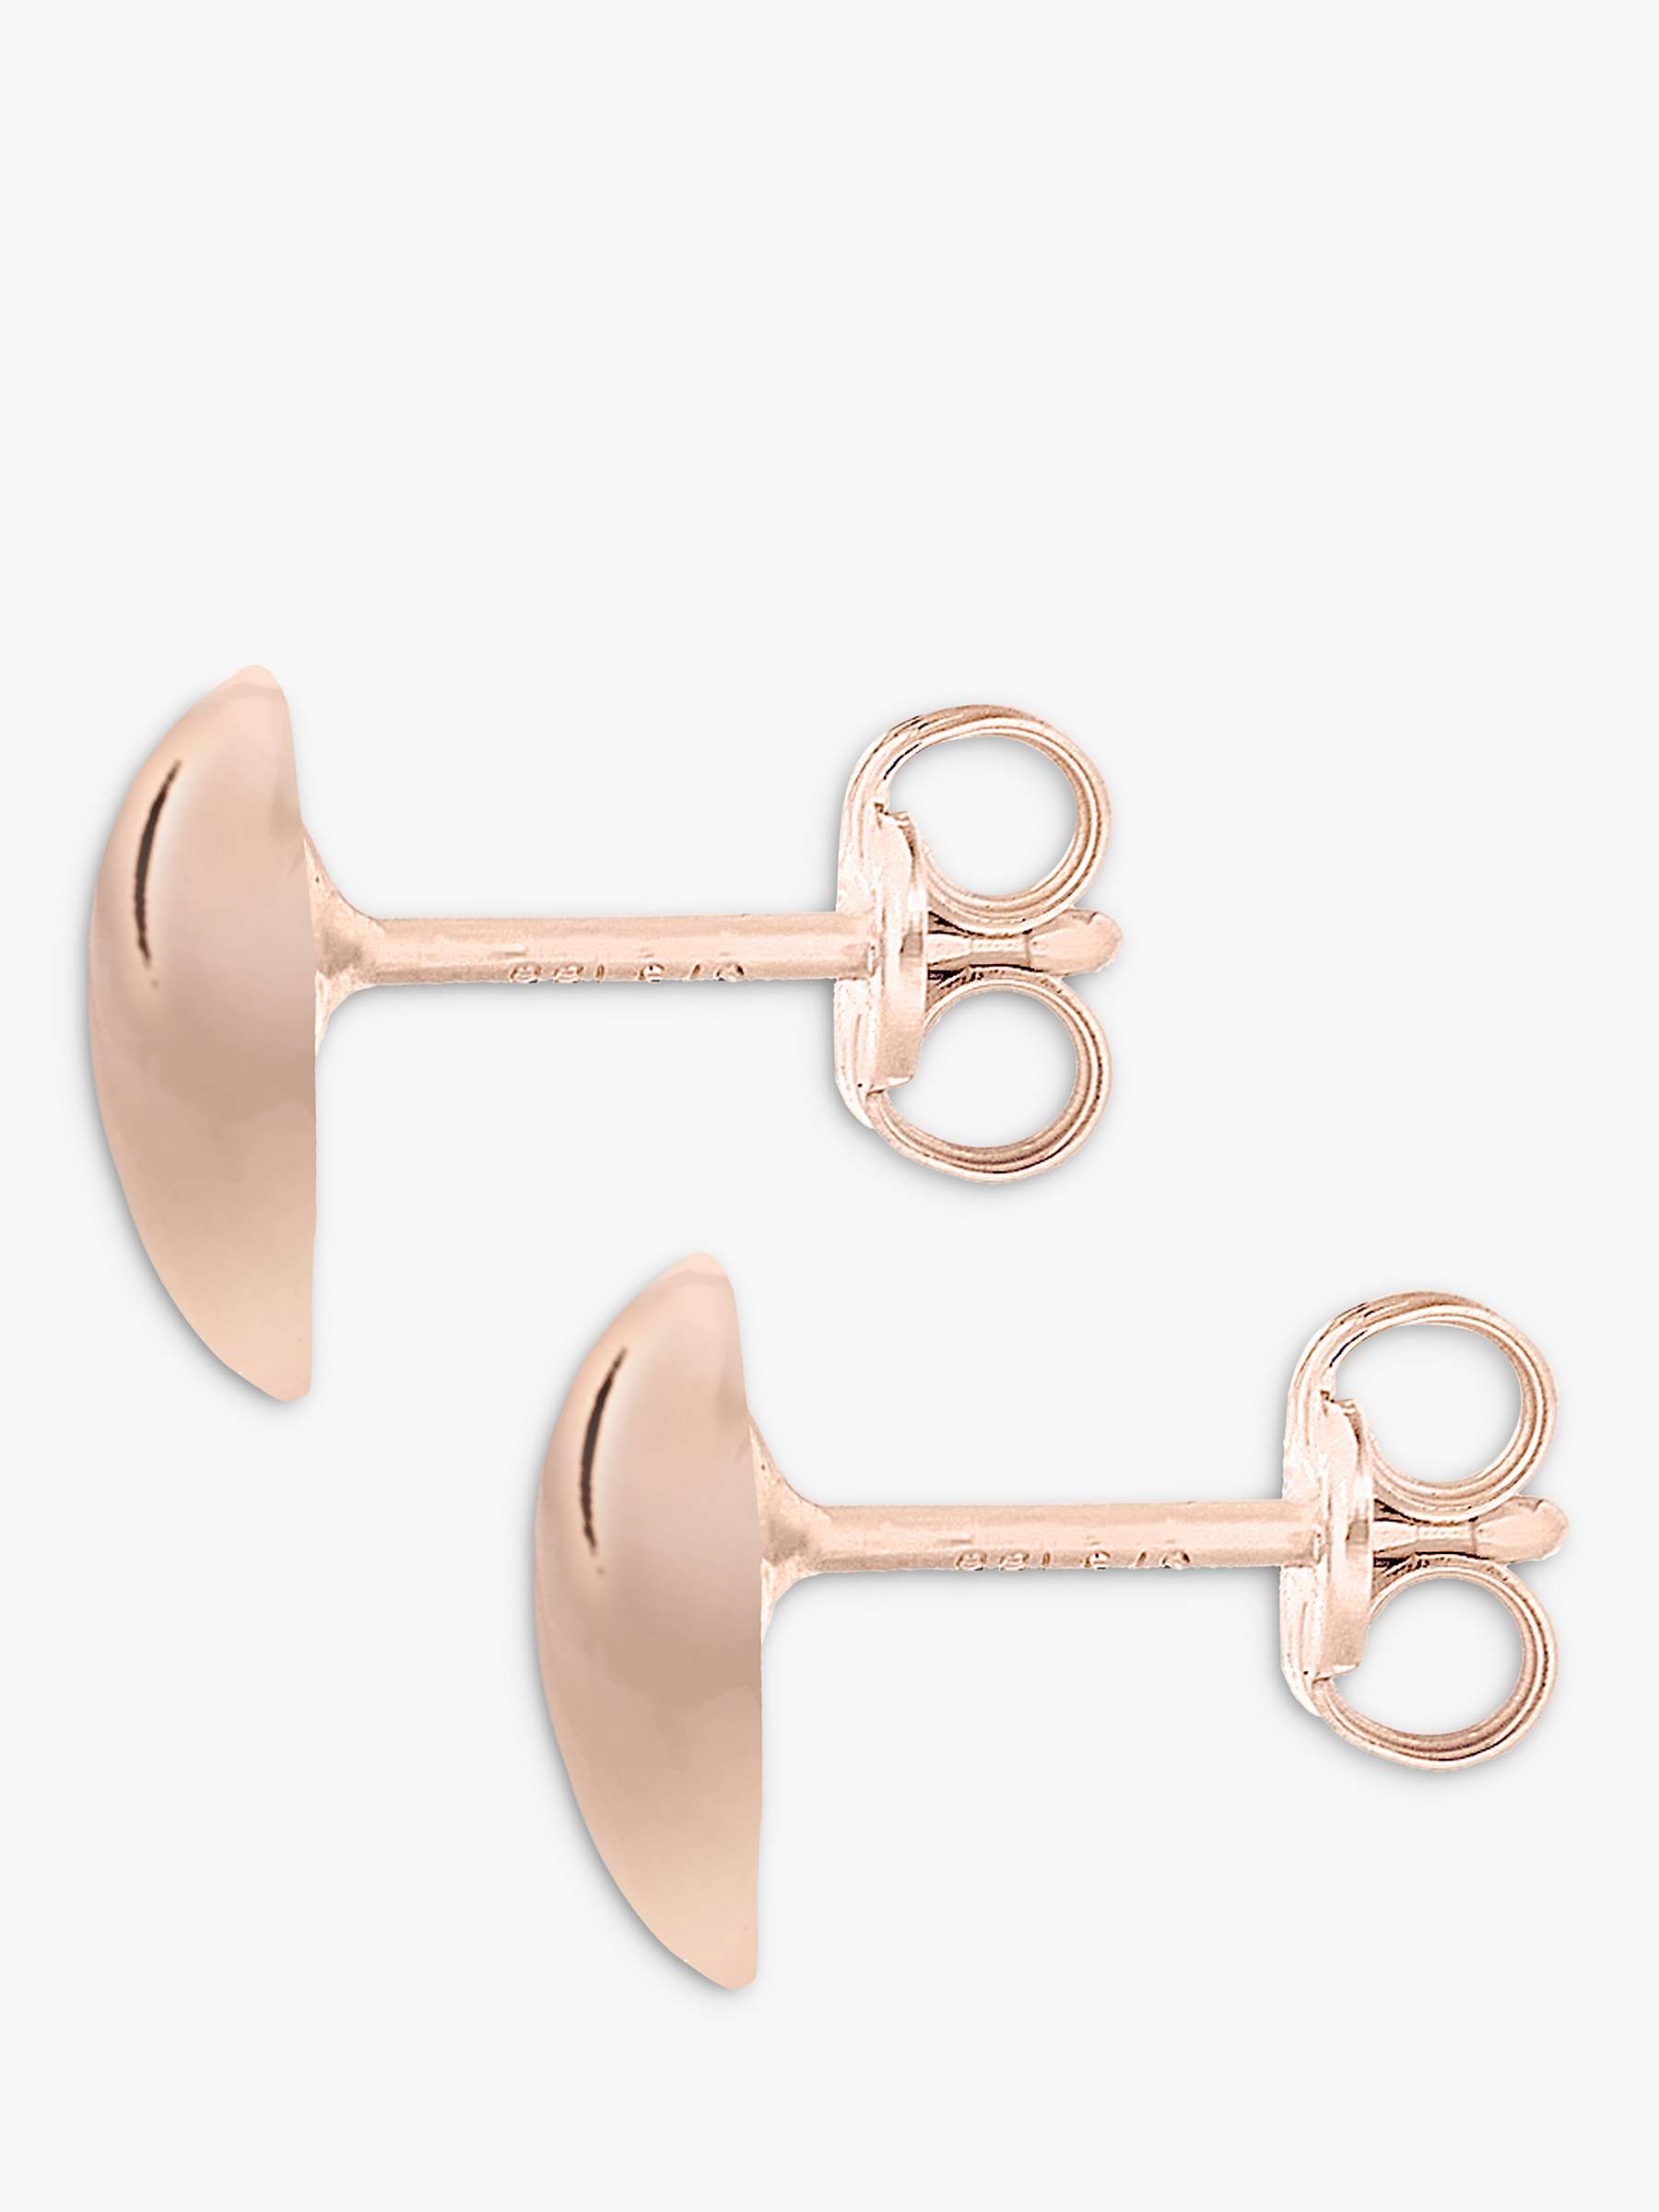 IBB 9ct Gold Puff Heart Stud Earrings, Rose Gold at John Lewis & Partners